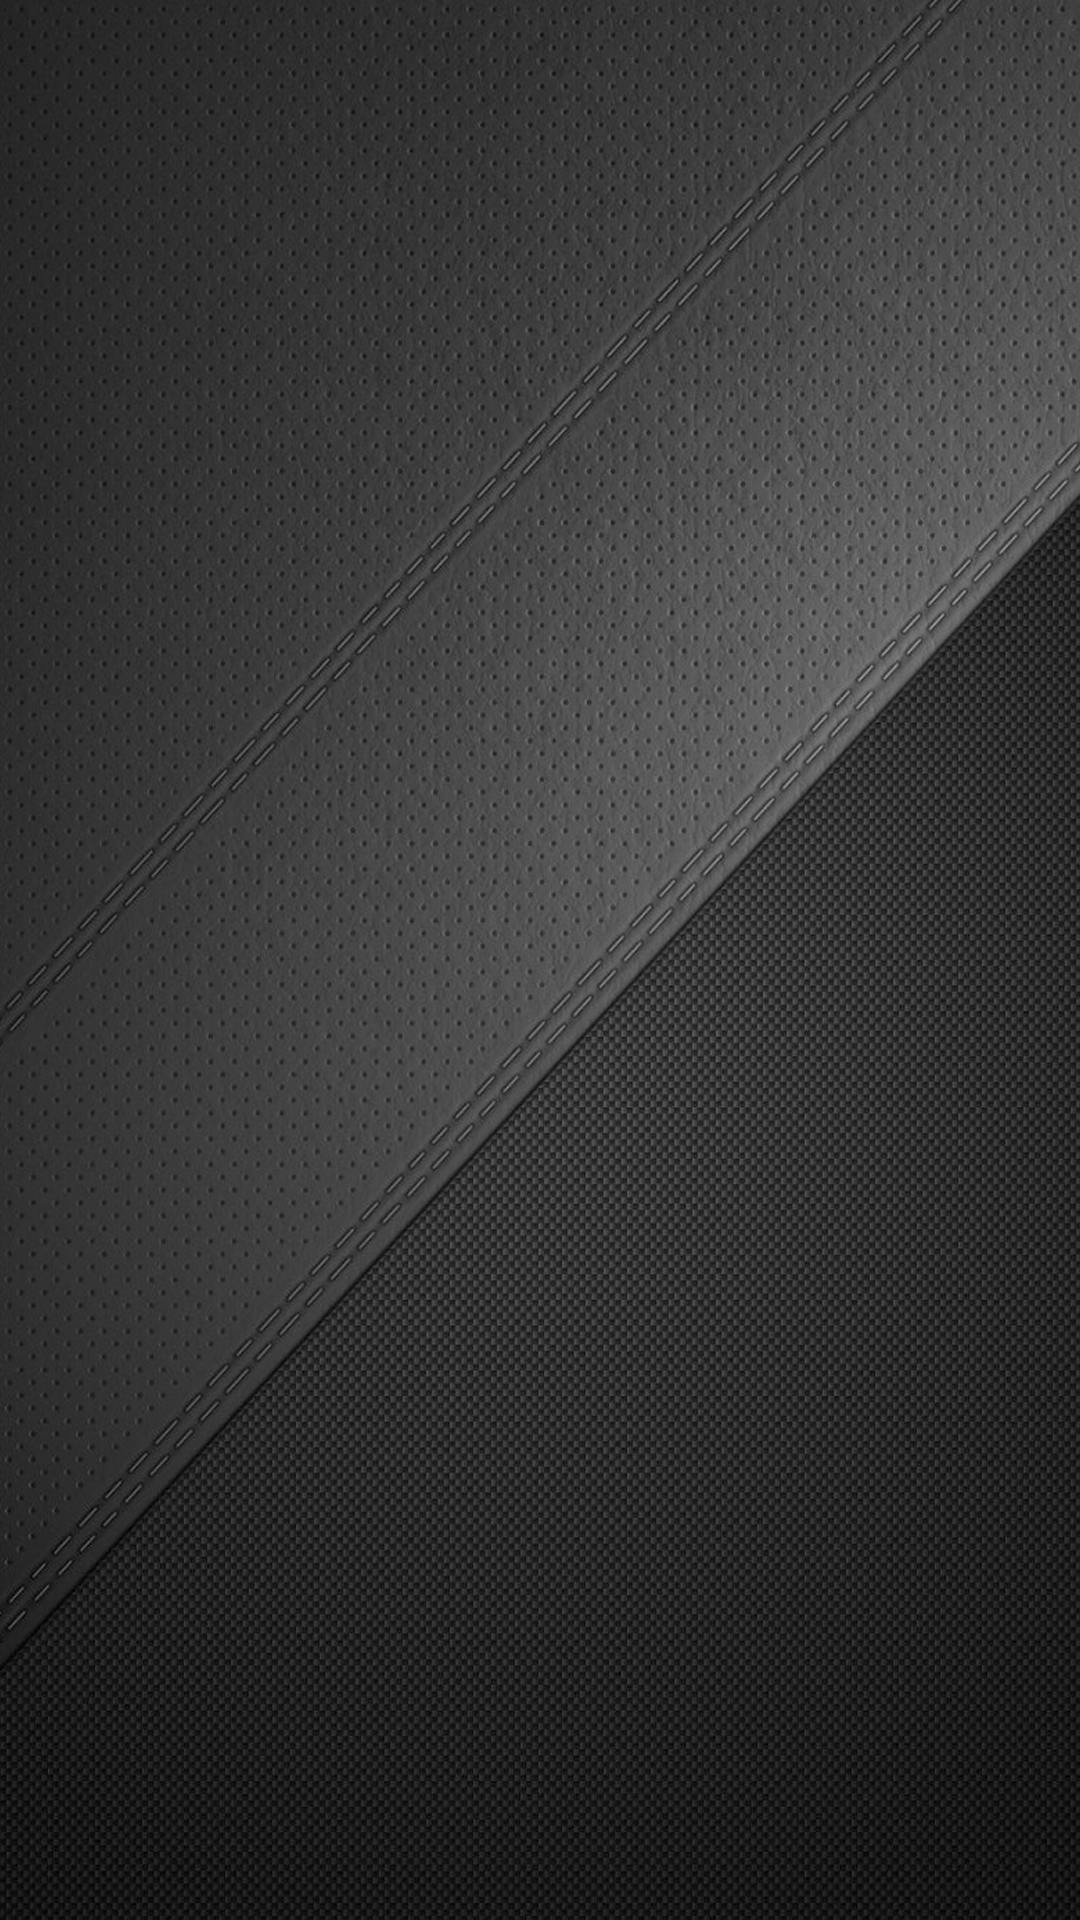 Perforated Leather Texture Dark Android Wallpaper free download